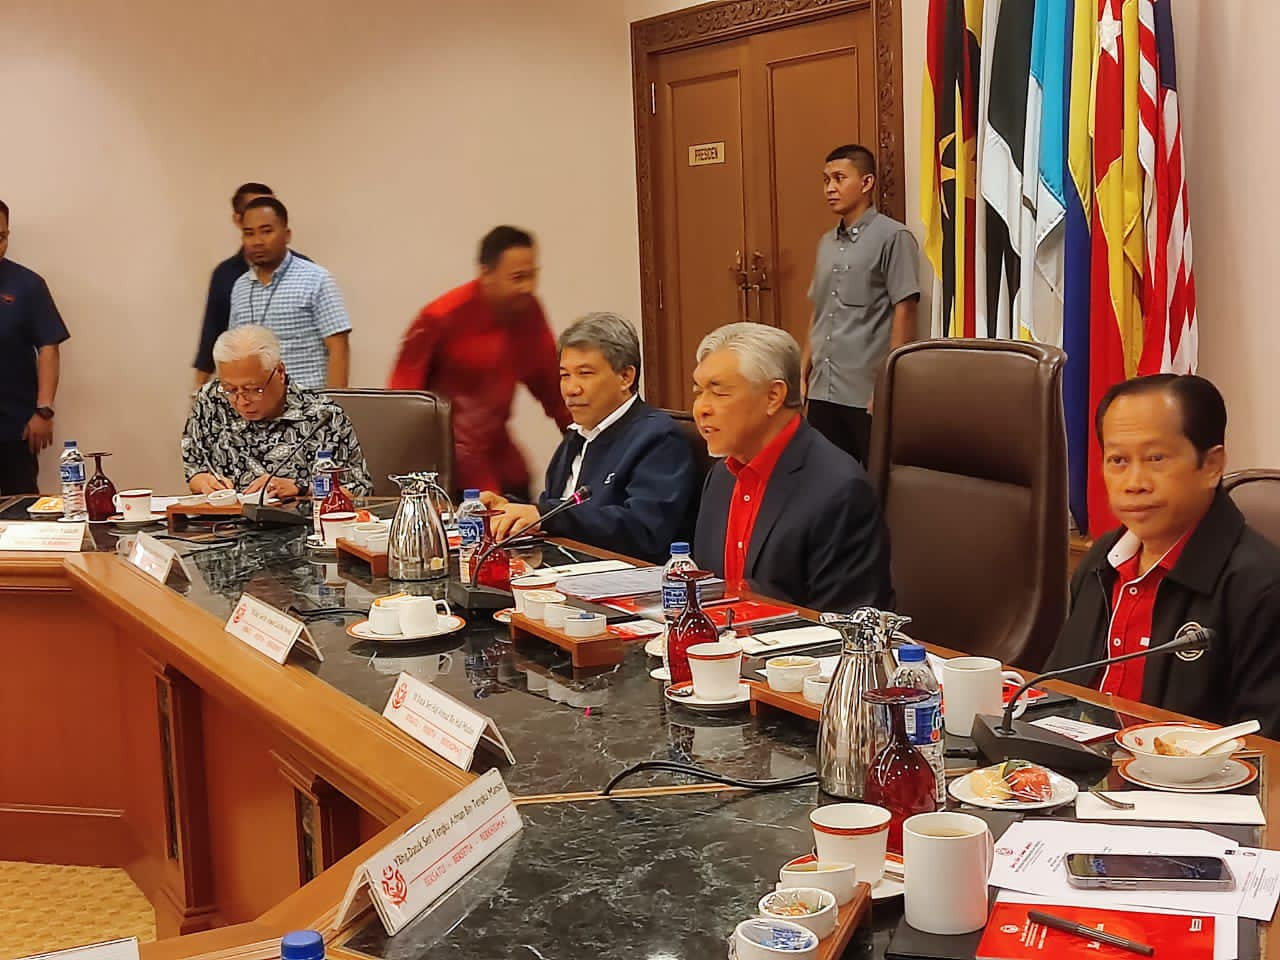 Separately, Datuk Seri Ahmad Maslan (right) says that Umno will hold its next annual general assembly between December 21 and 24 this year. – BN Comms Facebook pic, November 24, 2022